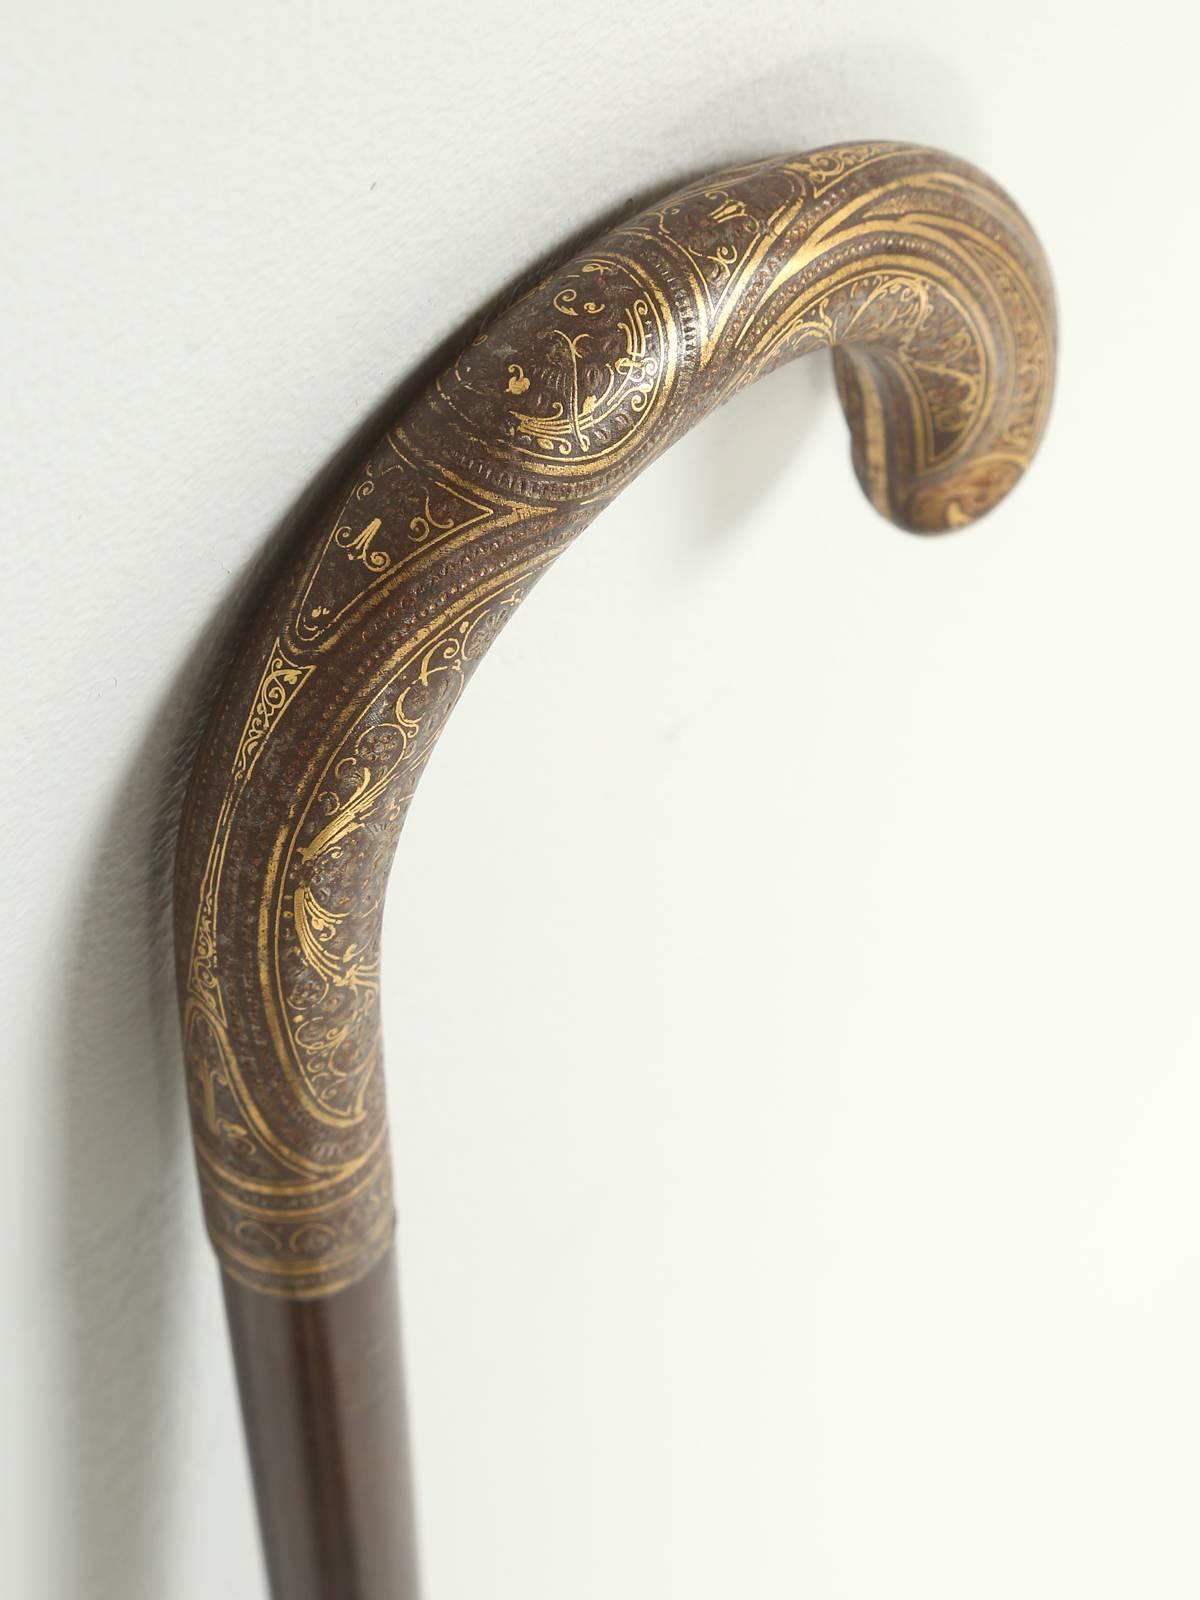 When people think of an antique cane or walking stick, they picture a feeble old person. However, between 1550 and 1930, canes were an accessory that a proper lady or gentleman would never leave home without one. They were intended to be worn and